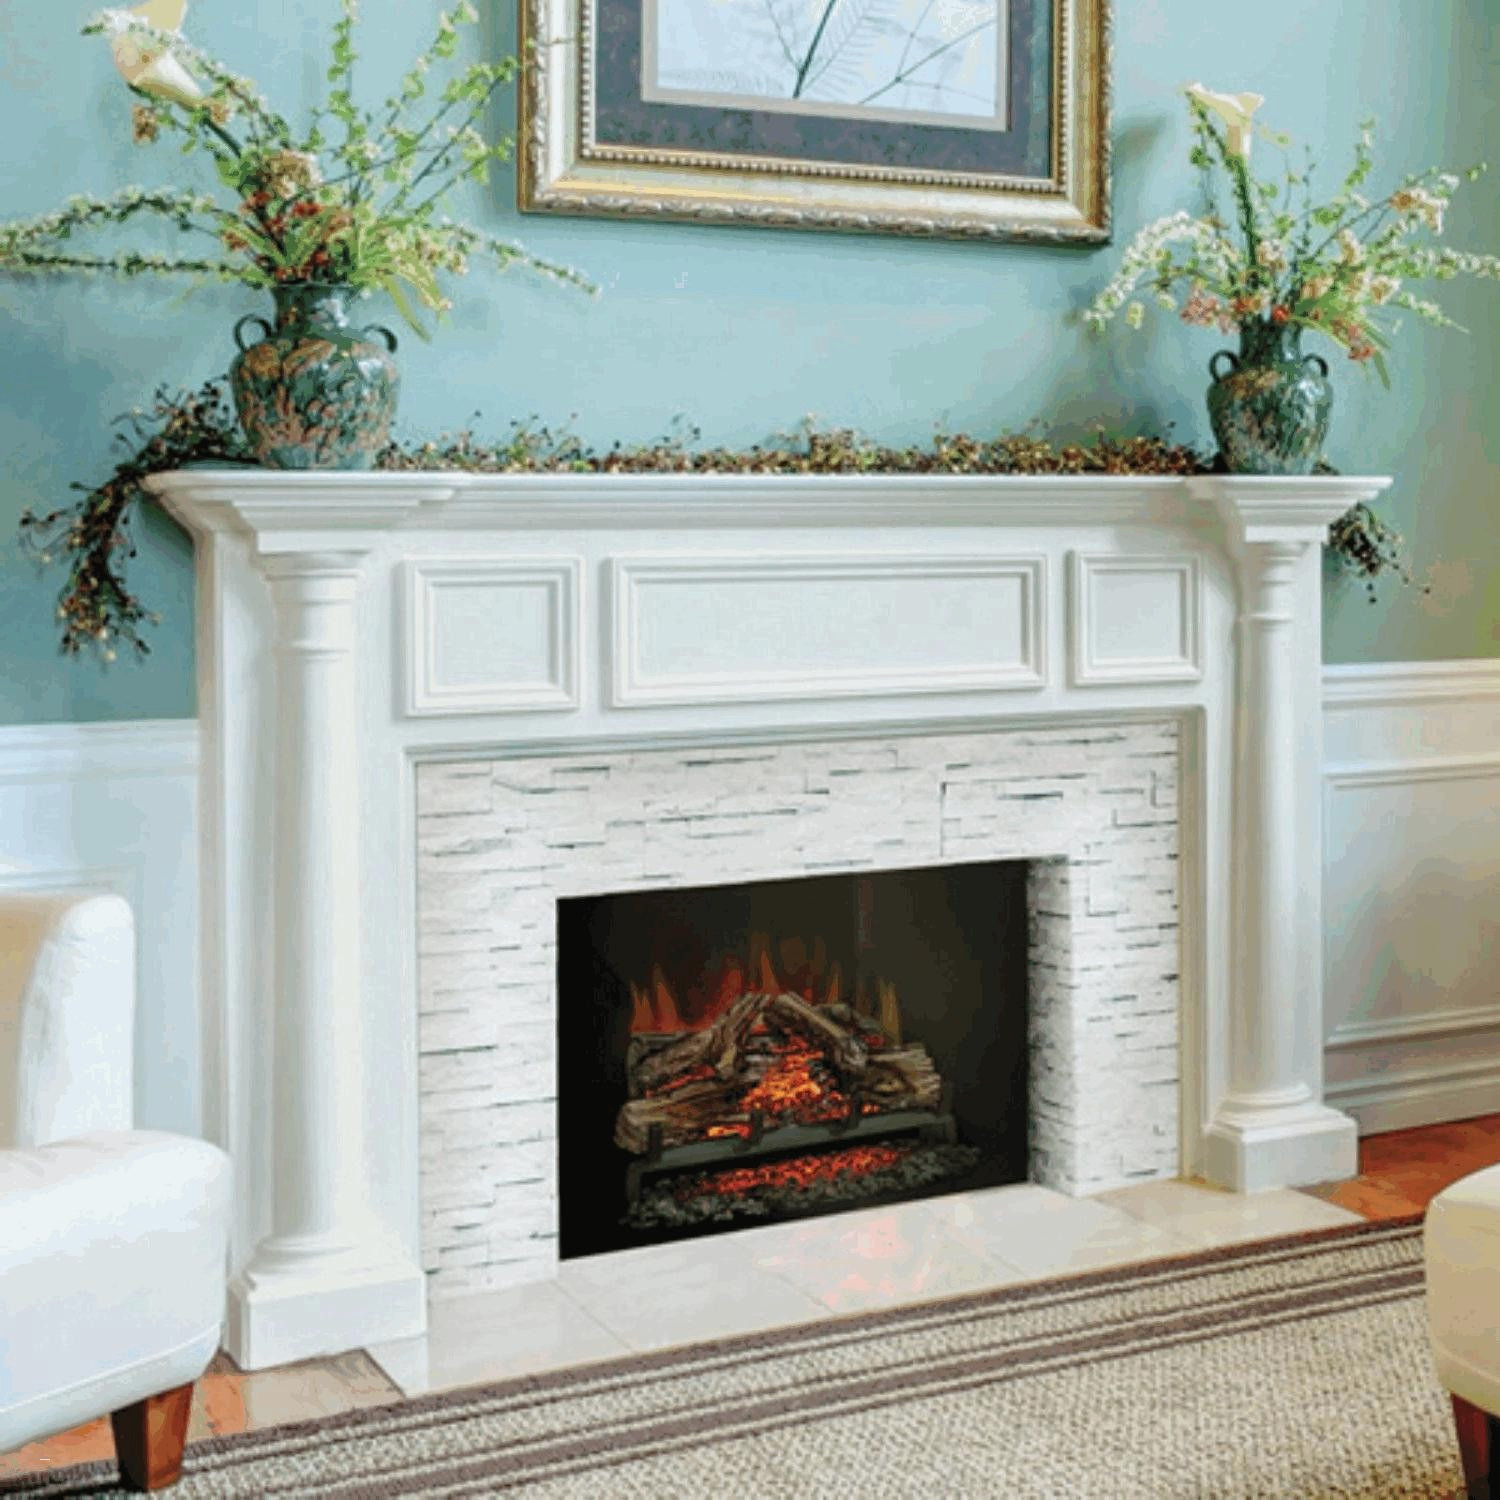 design fireplace gas home interior ideas facing designs gallery kit view and antique marble engaging surrounds kits surround